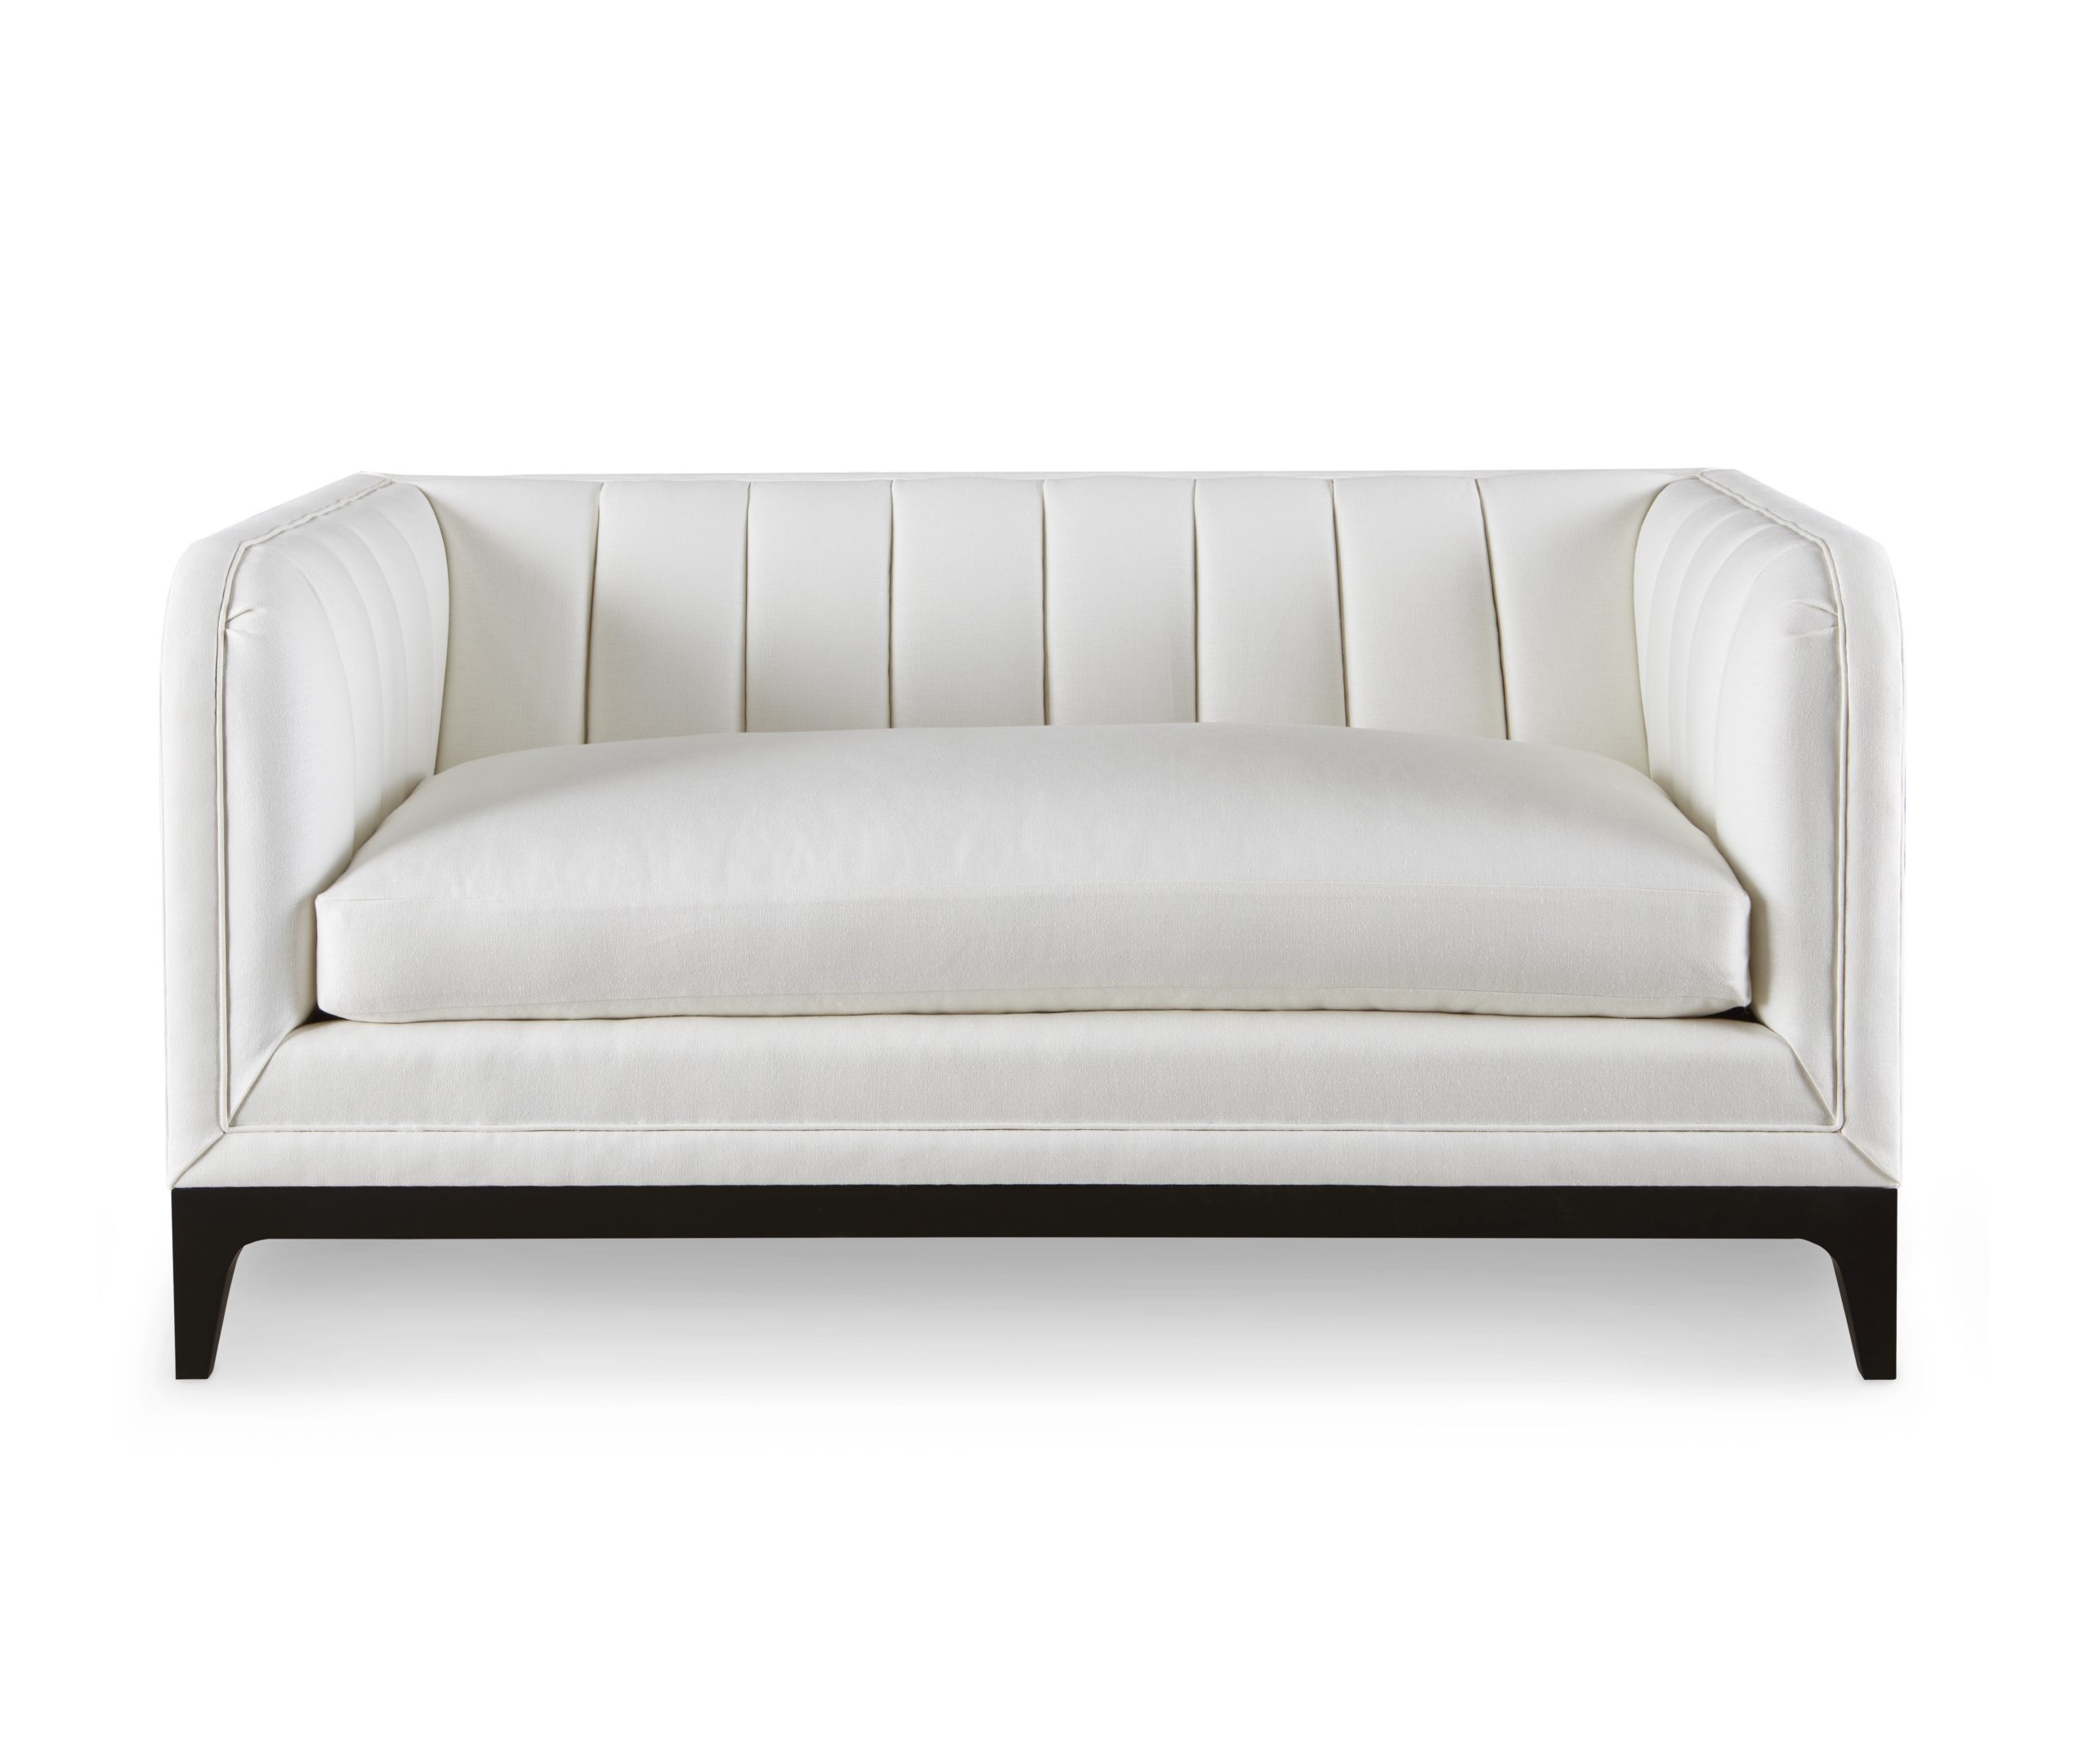 Baker_products_WNWN_ashton_loveseat_BAU3114L_FRONT-scaled-1